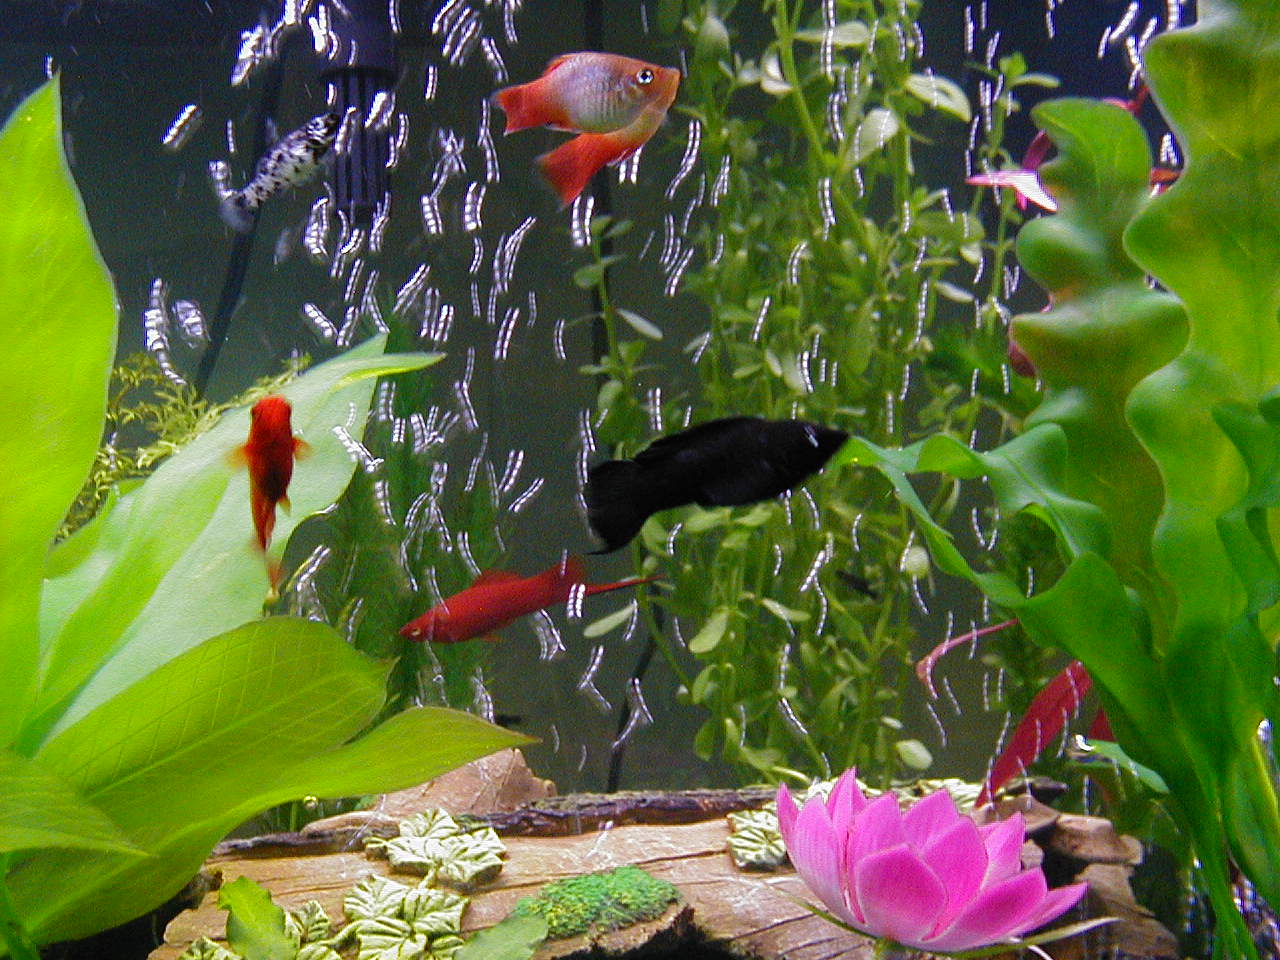 Here's a black molly, red velvet sword platy, and tequila sunrise platy